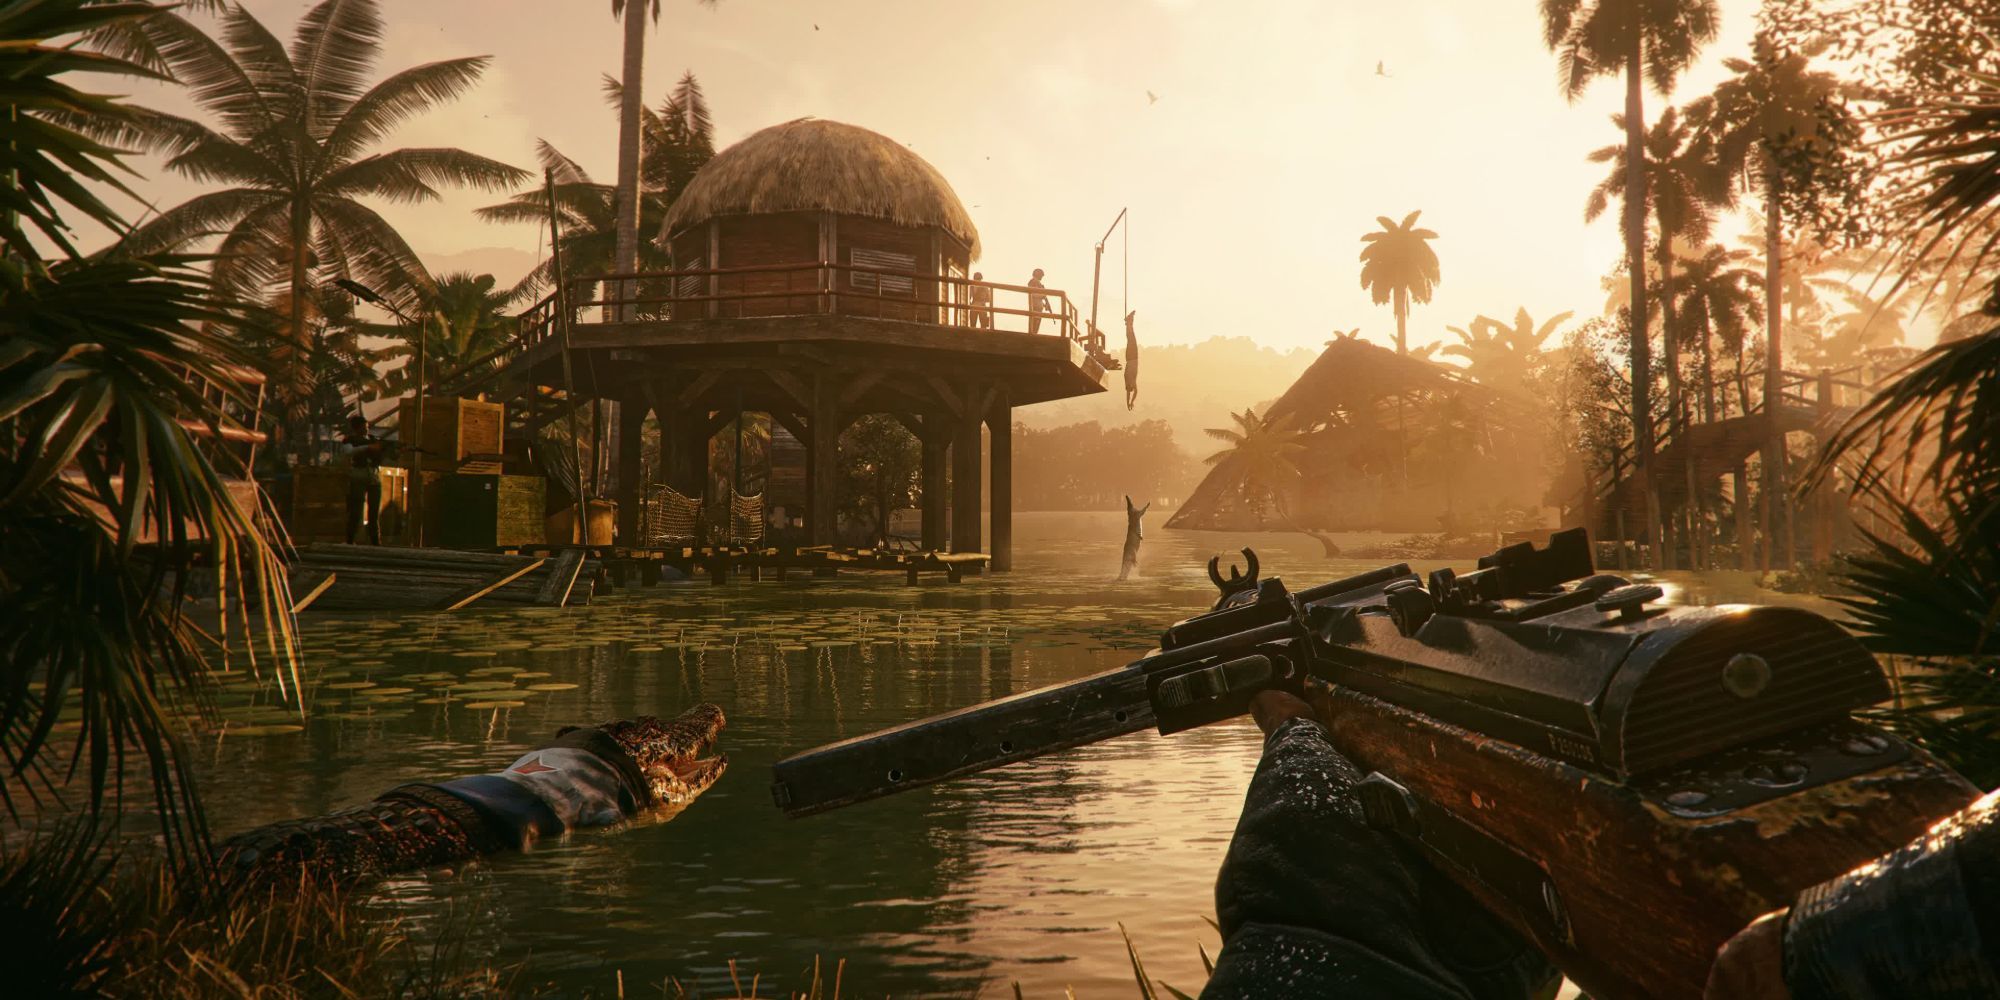 Scene from Far Cry 6 showing the player character holding a gun in a swamp-like area 